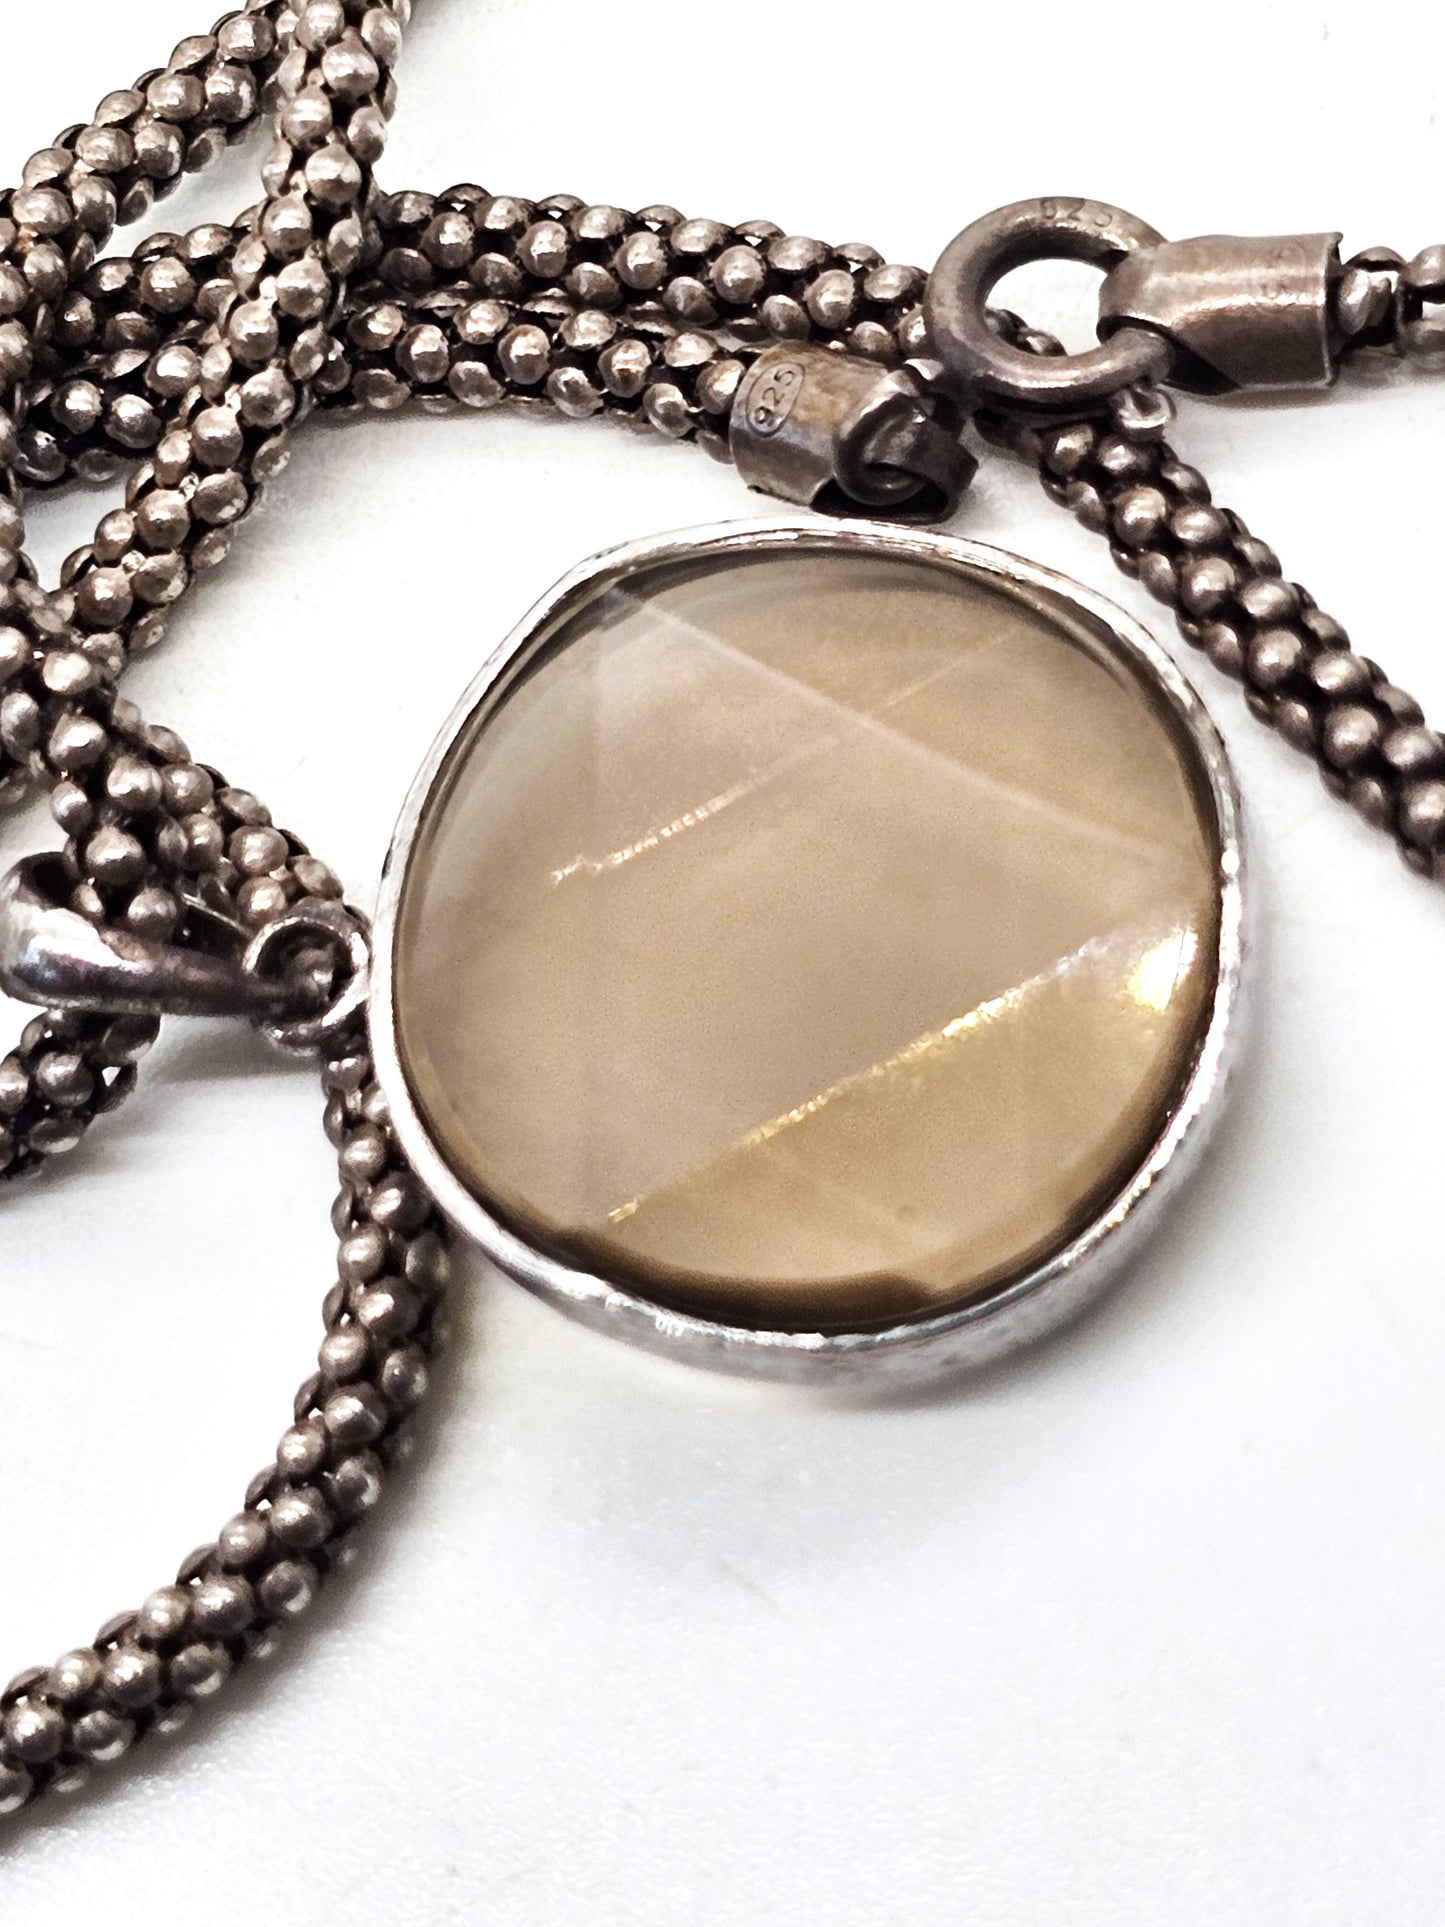 Smokey Quartz faceted pendant on ornate sterling silver chain